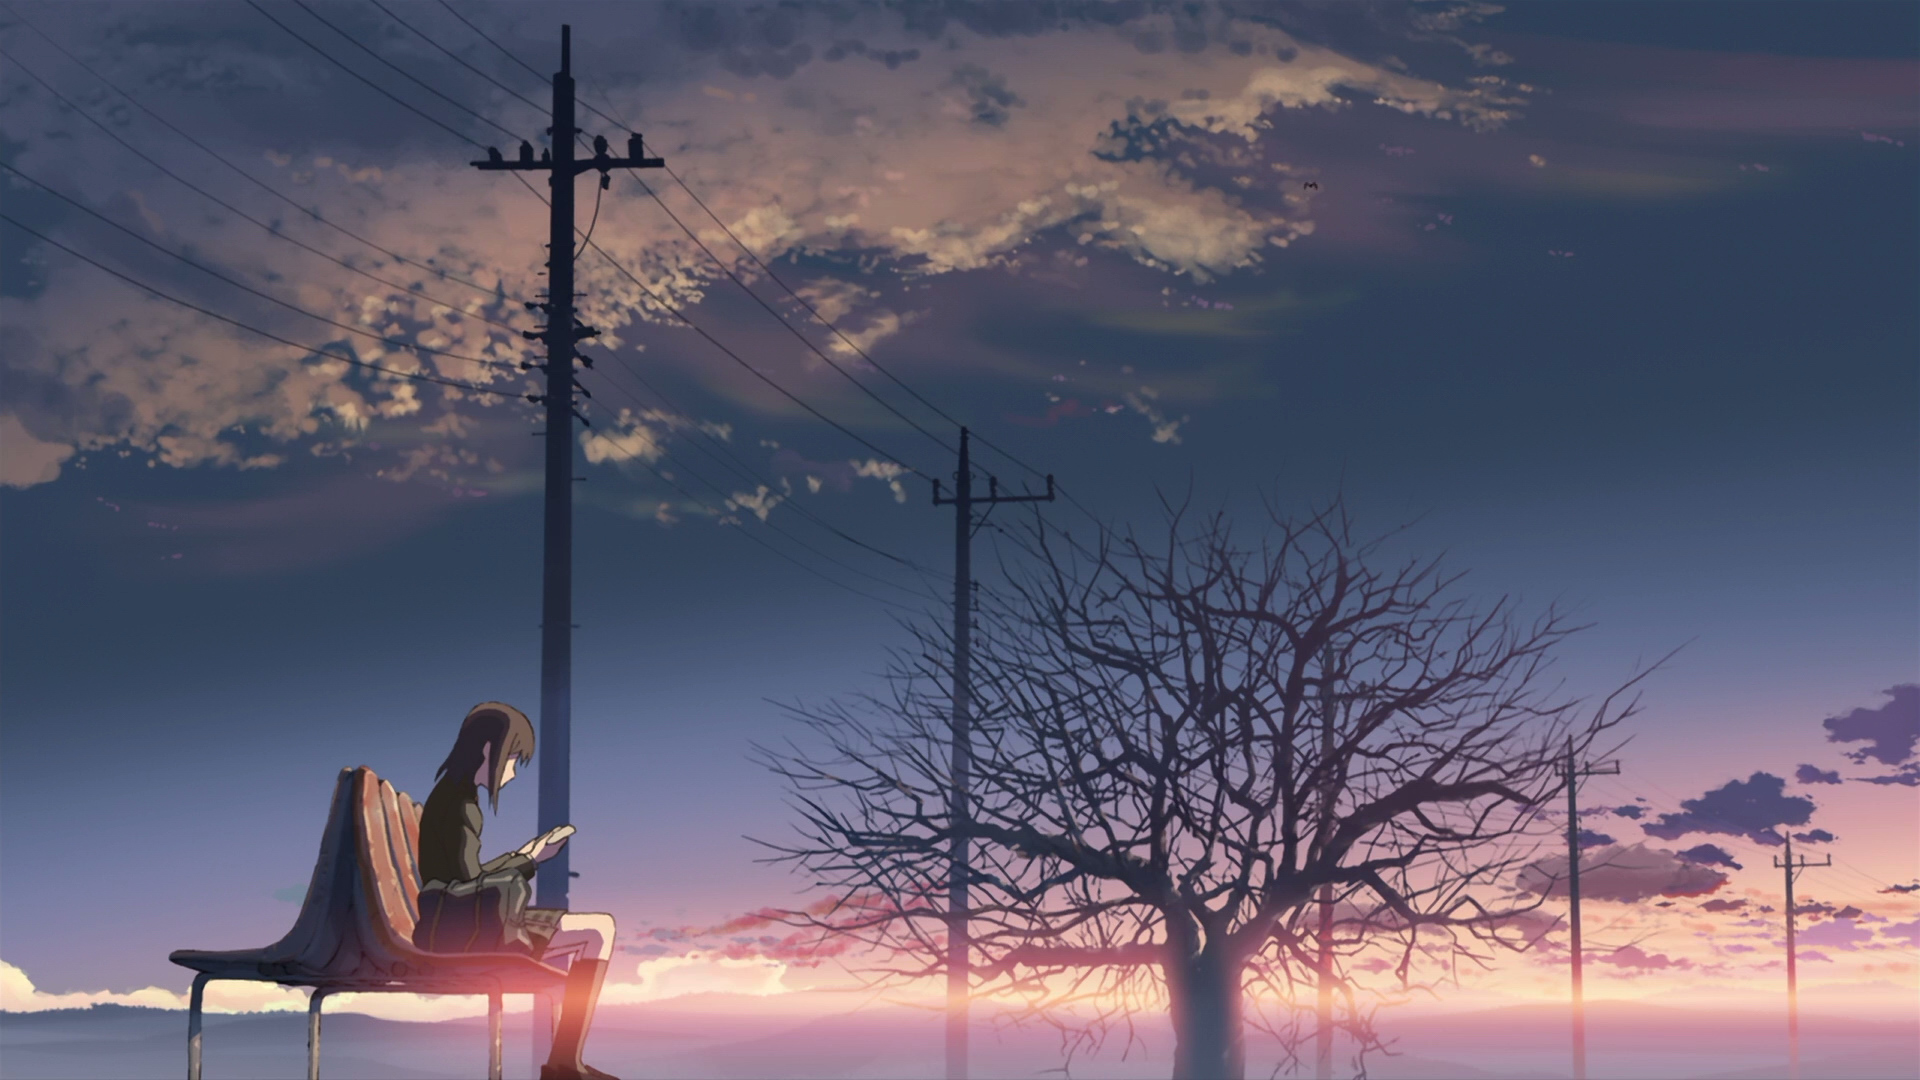 Amazing 5 Centimeters Per Second Pictures & Backgrounds